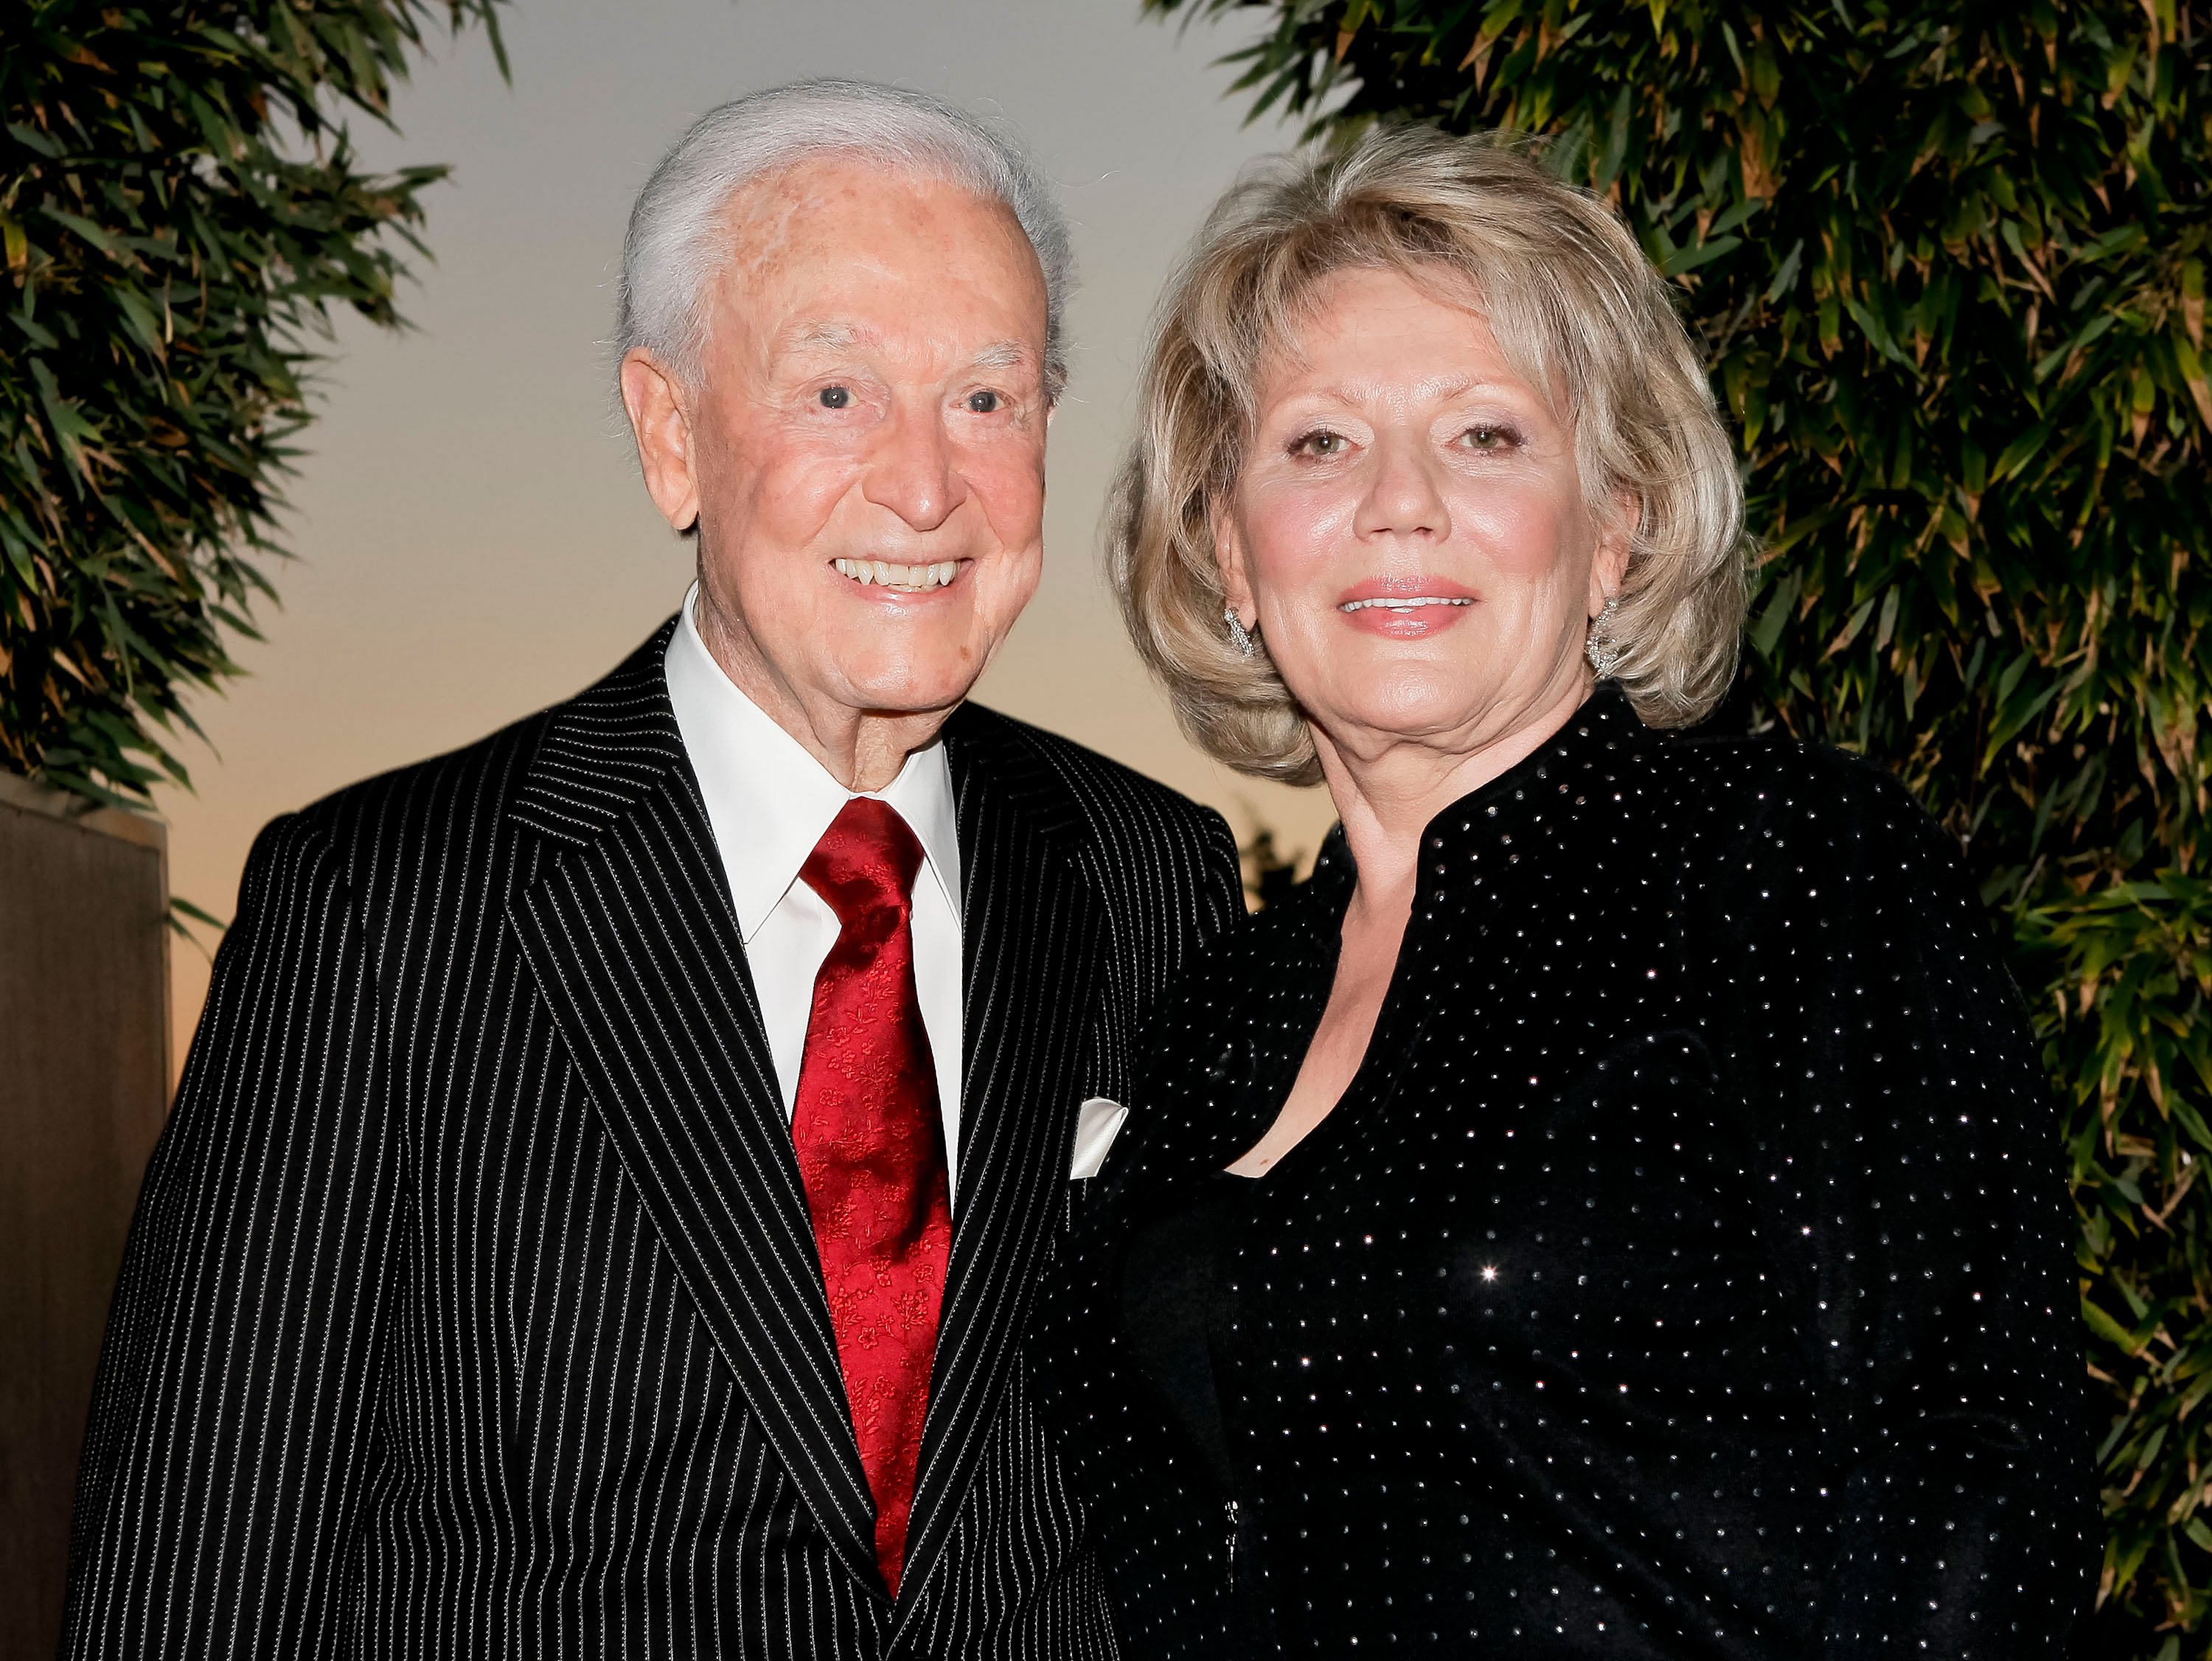 Bob Barker and Nancy Burnet attend the Animal Defenders International gala on October 13, 2012 in Hollywood, California | Source: Getty Images